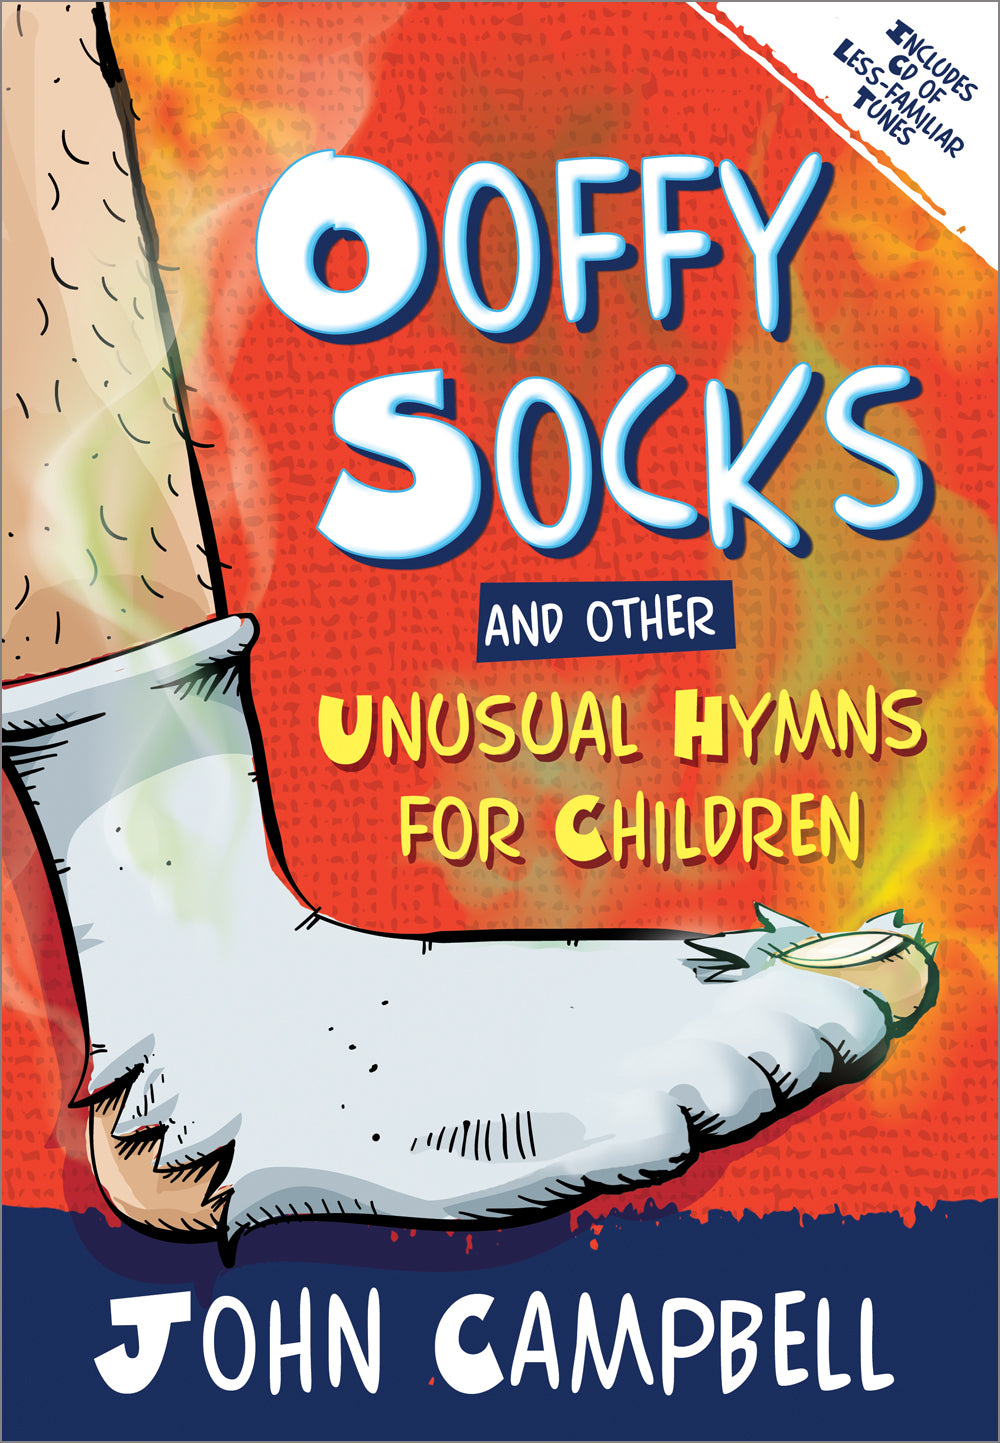 Ooffy Socks And Other Unusual Hymns For ChildrenOoffy Socks And Other Unusual Hymns For Children